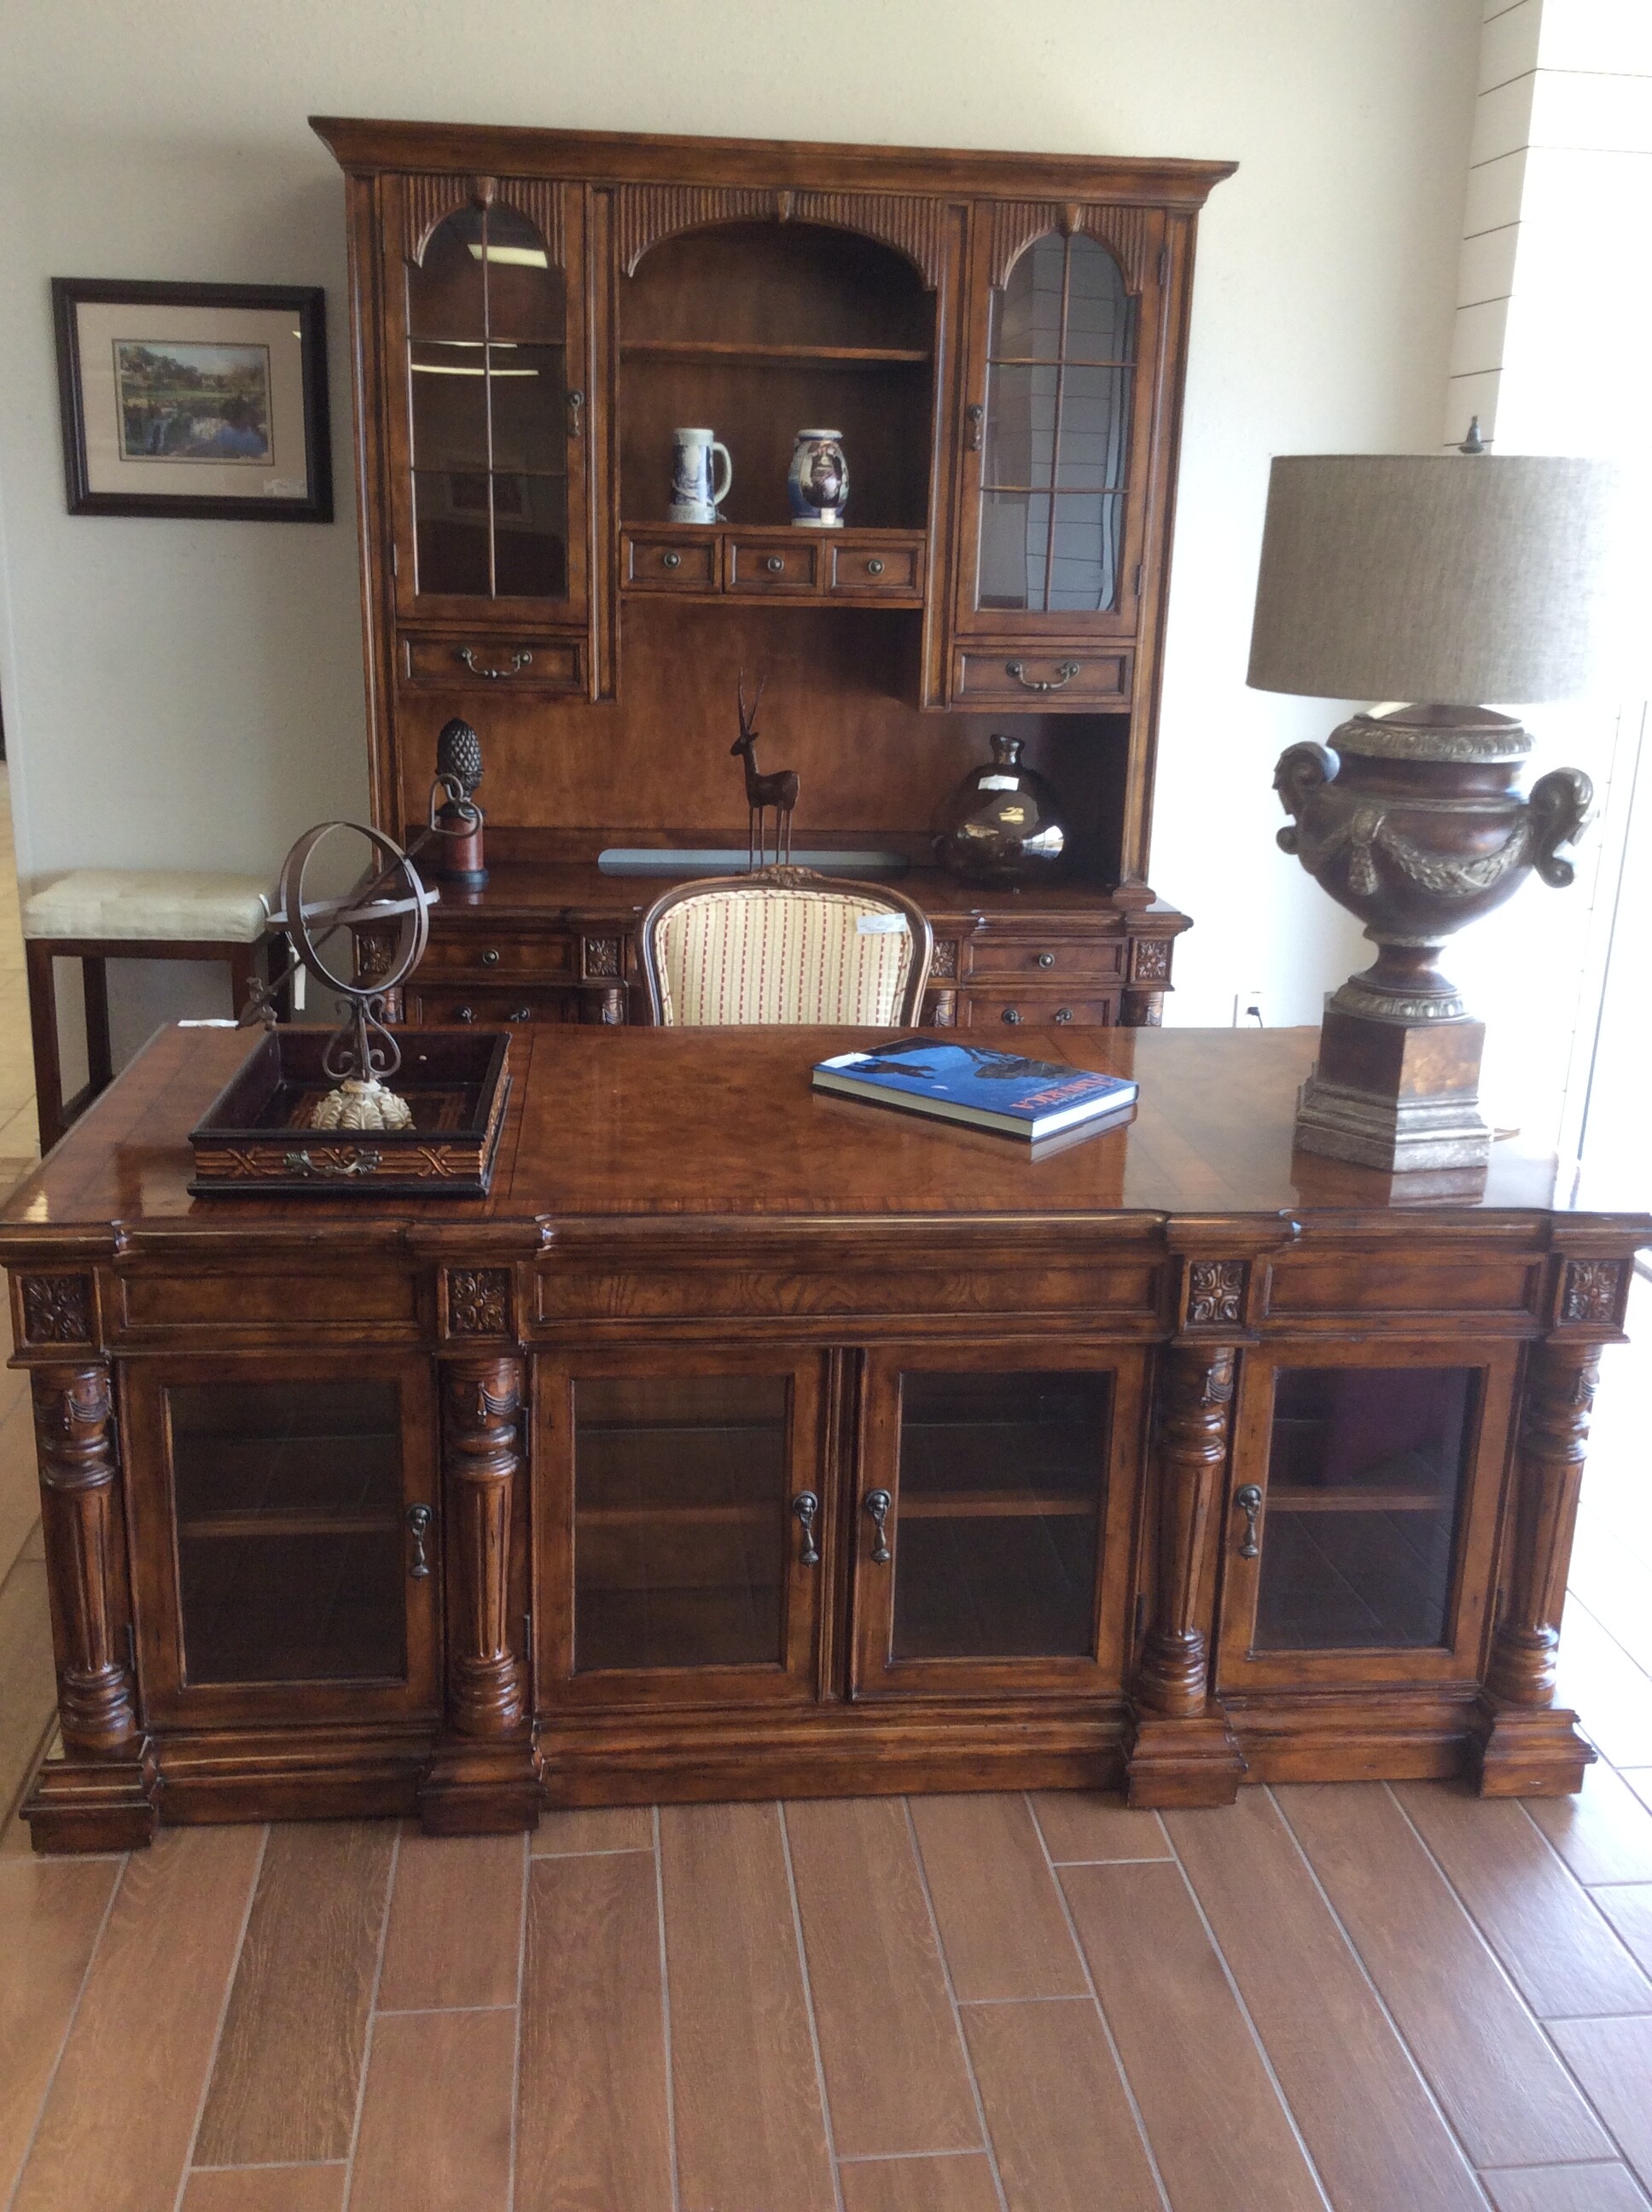 This stately desk and credenza has carved details in a dark walnut finish. There is front and back storage in the desk. Great for an office or study.